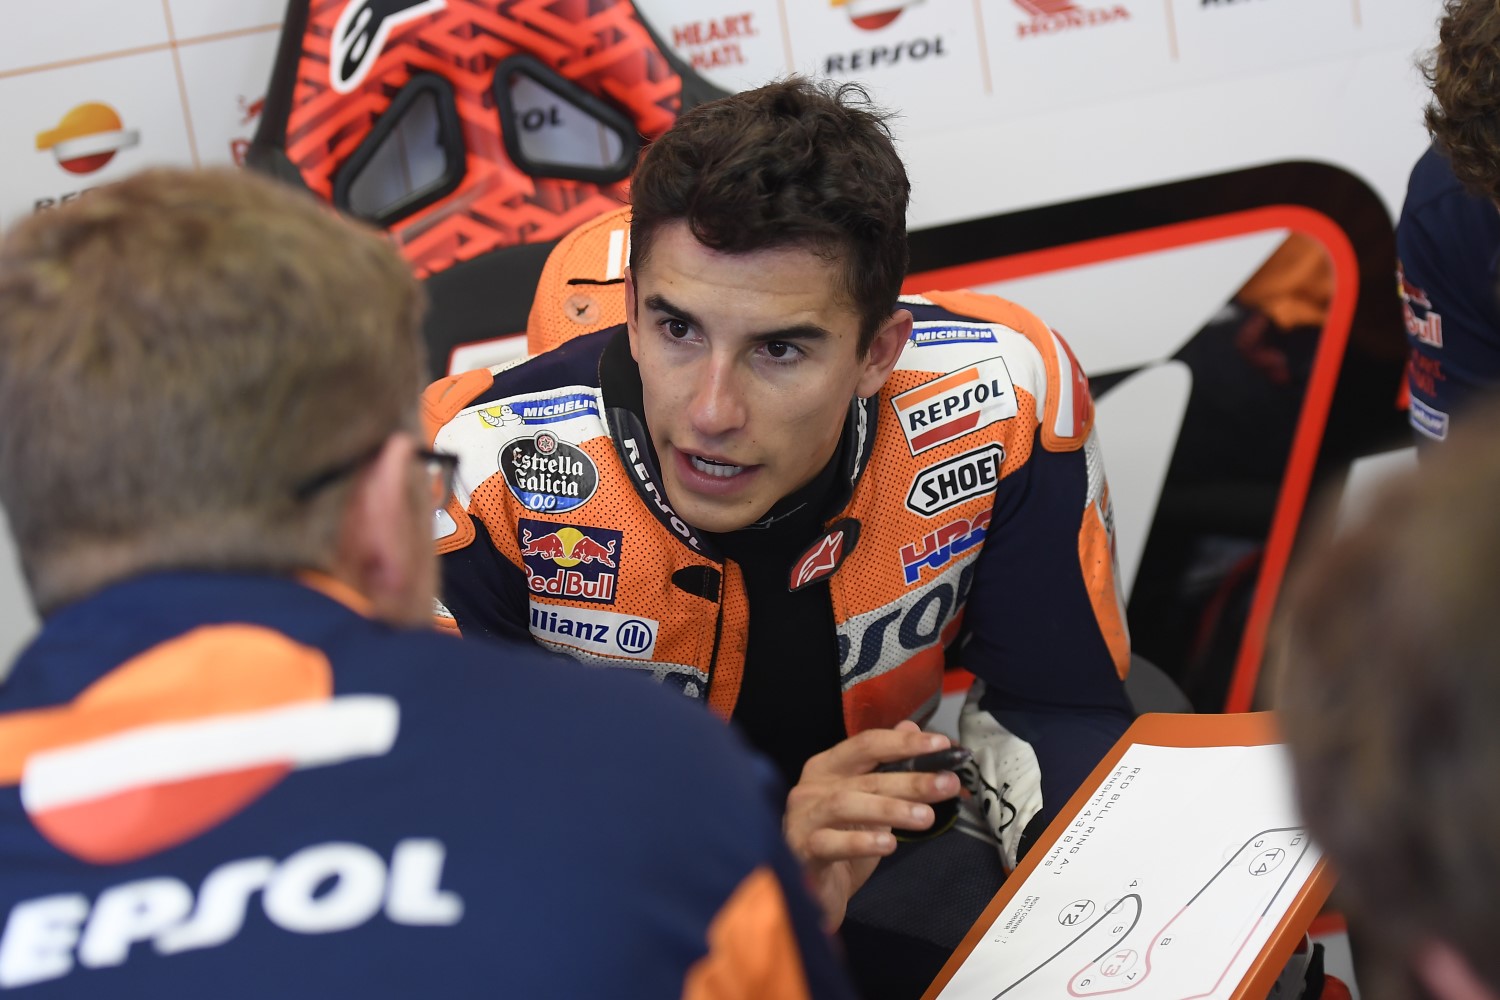 Marquez talks to his engineer